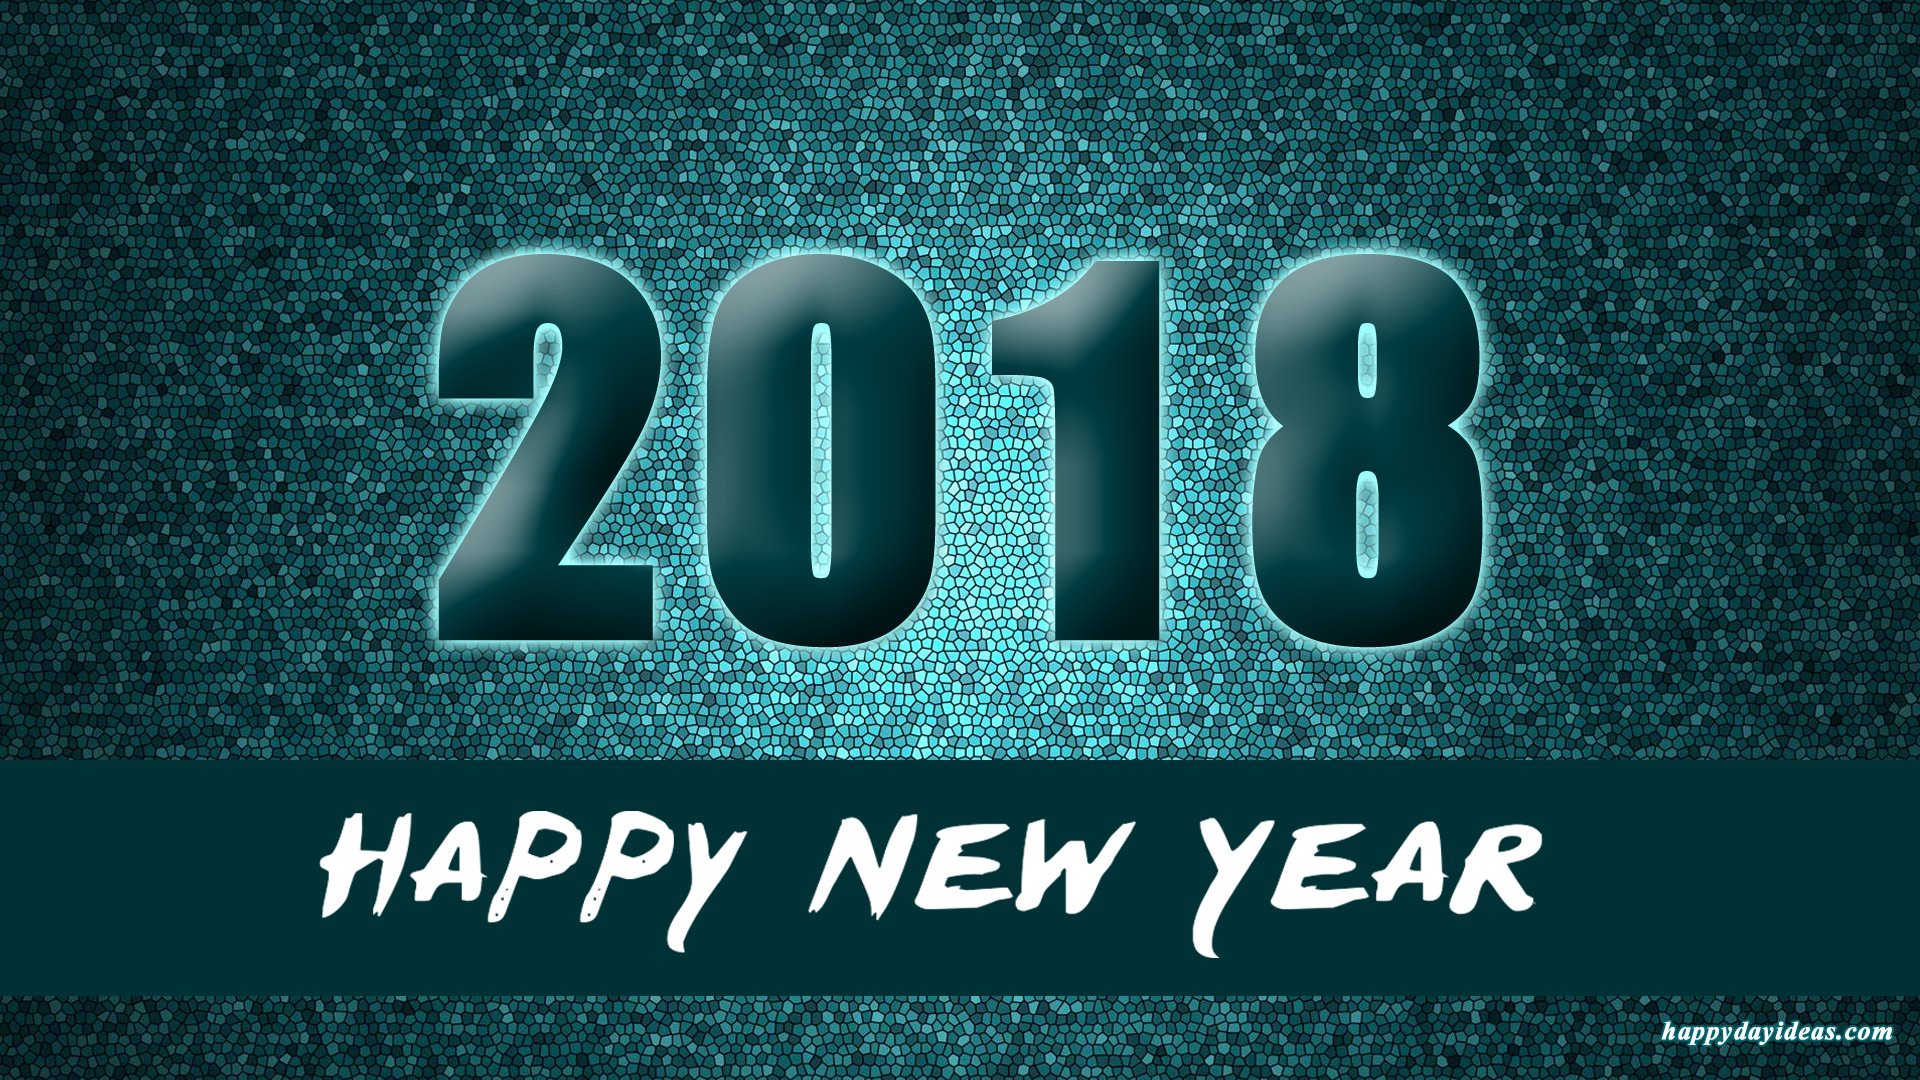 Happy New Year 2018 wallpaper download in HD 1920x1080